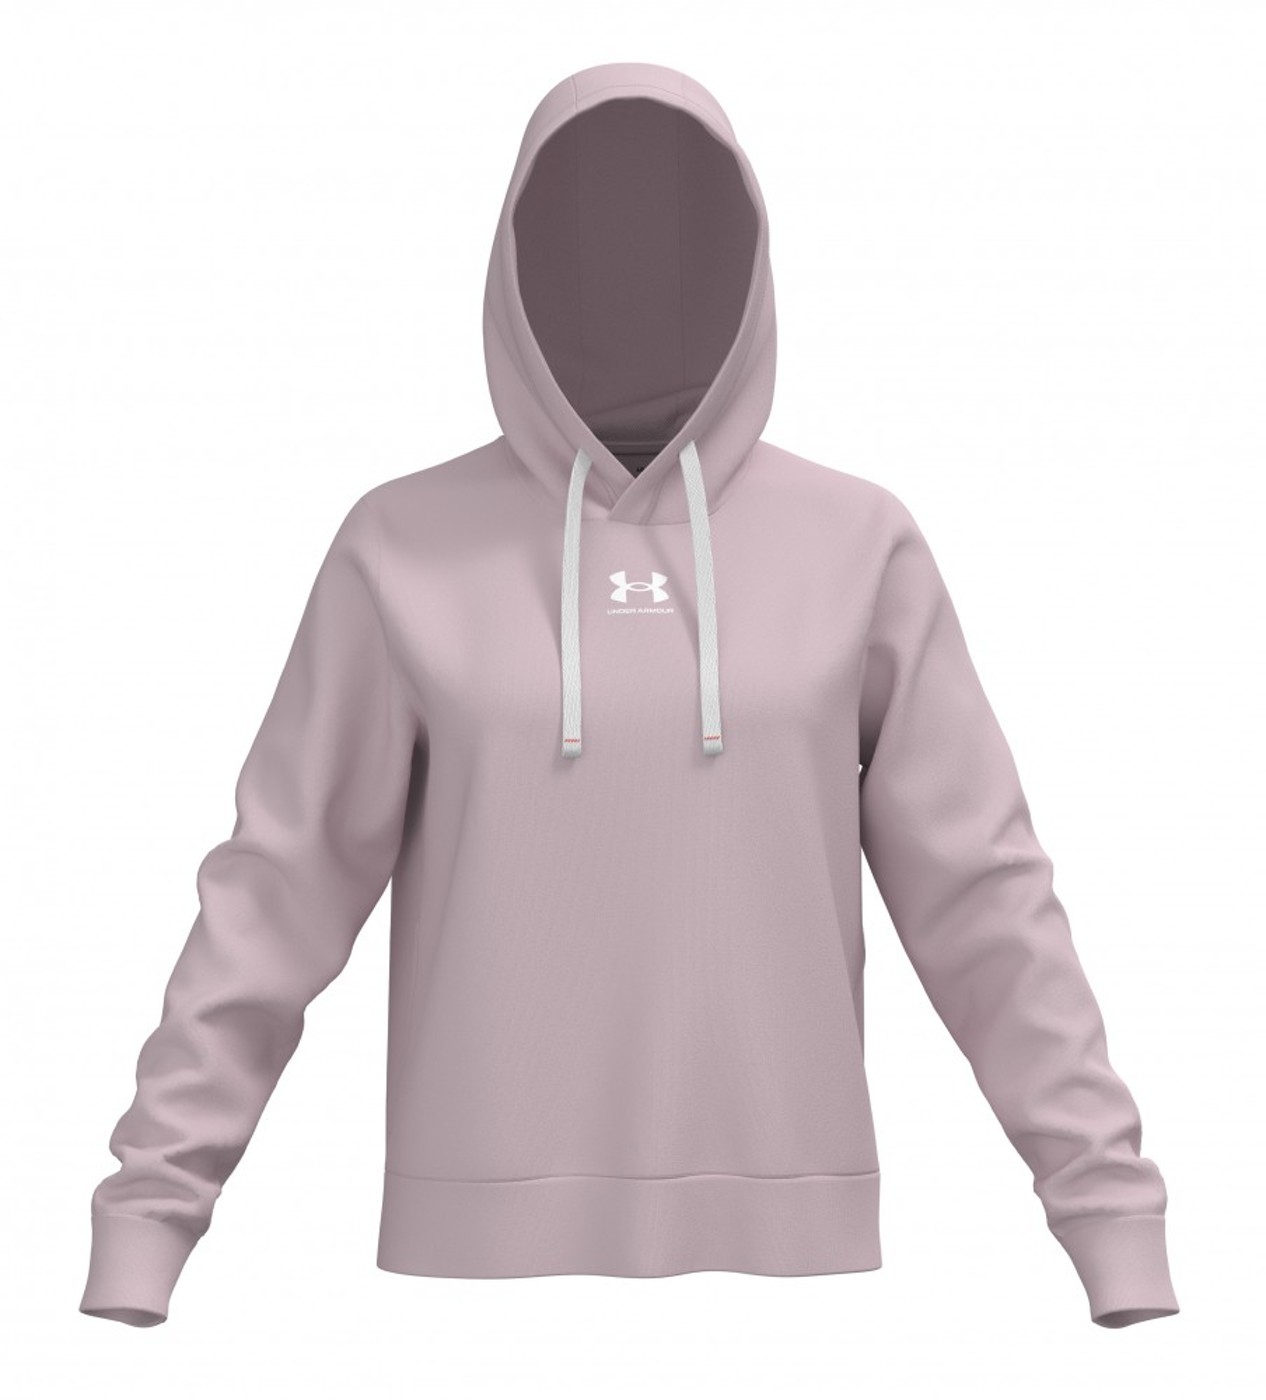 UNDER ARMOUR Rival Terry Hoodie-GRY,XXL - Damen